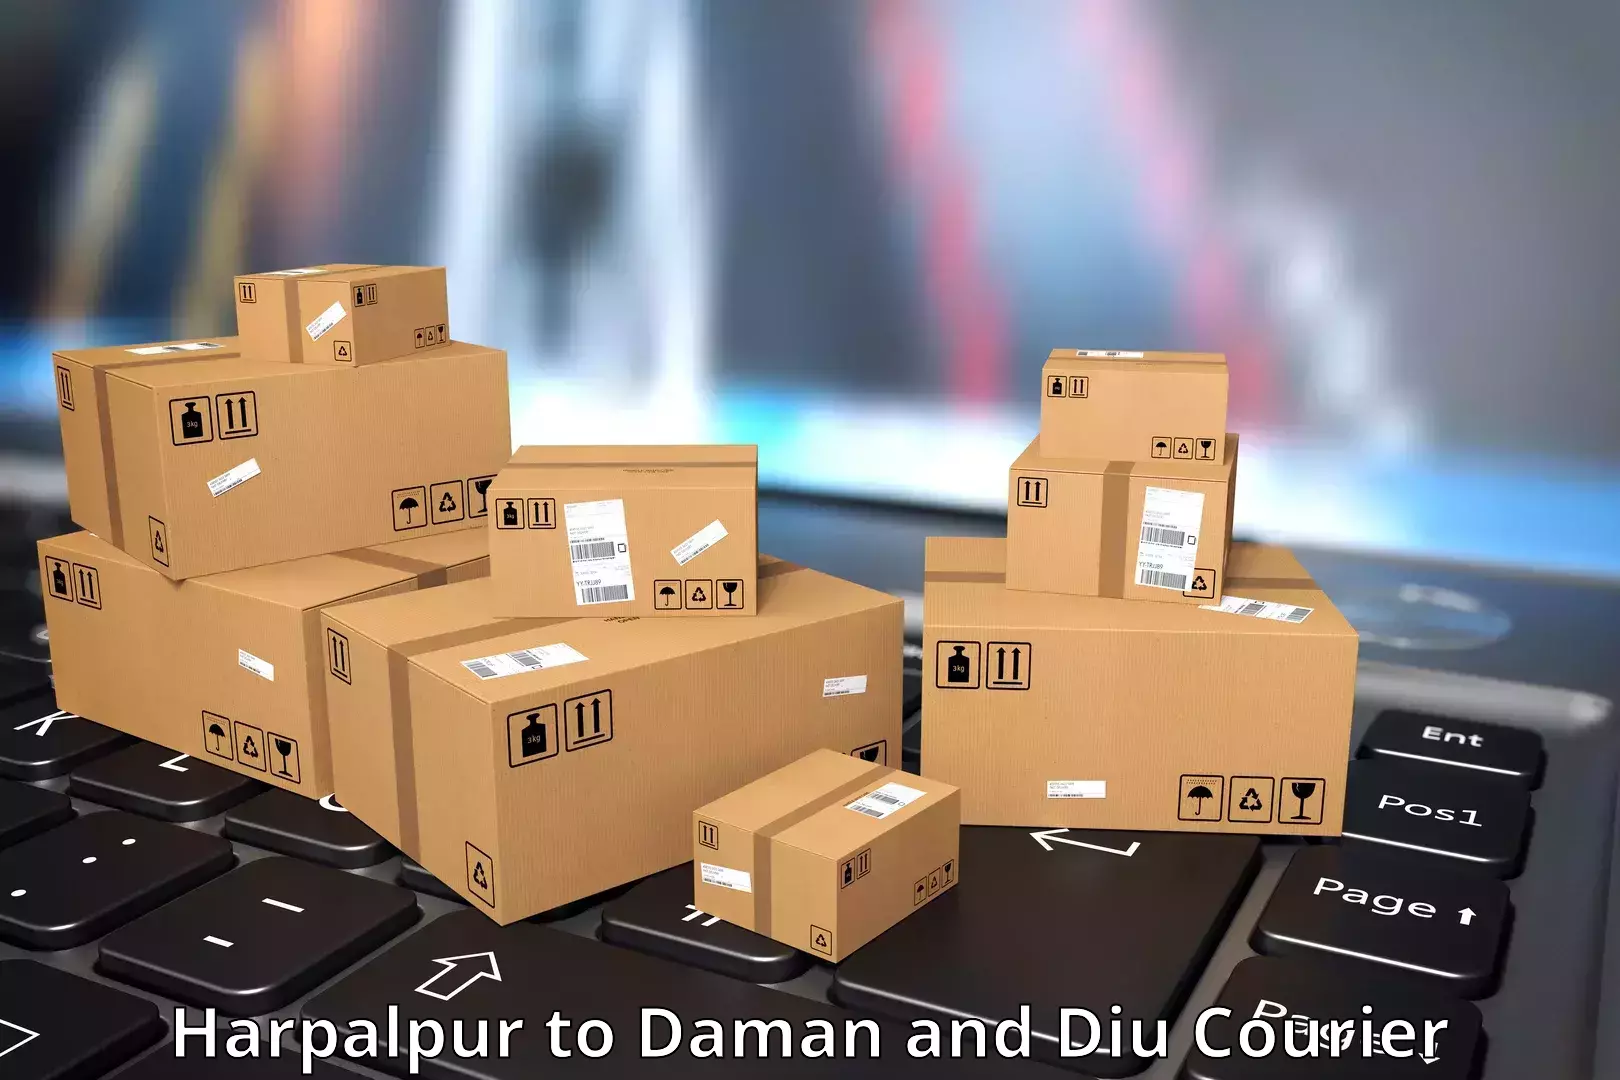 24-hour courier services Harpalpur to Diu